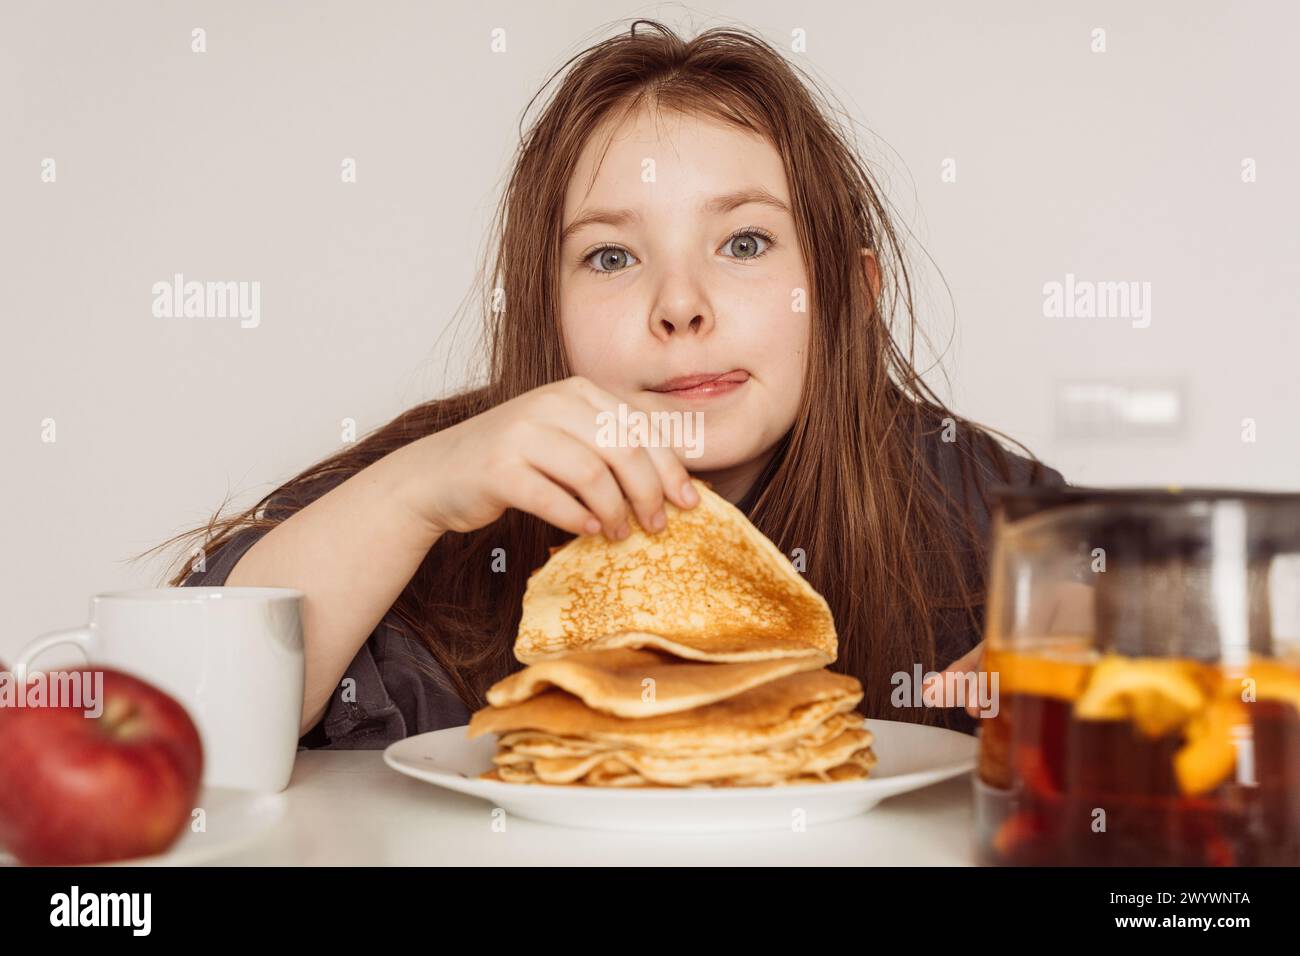 Teenage girl prepares to eat a stack of pancakes while licking her lips. Selected Focus. High quality photo Stock Photo